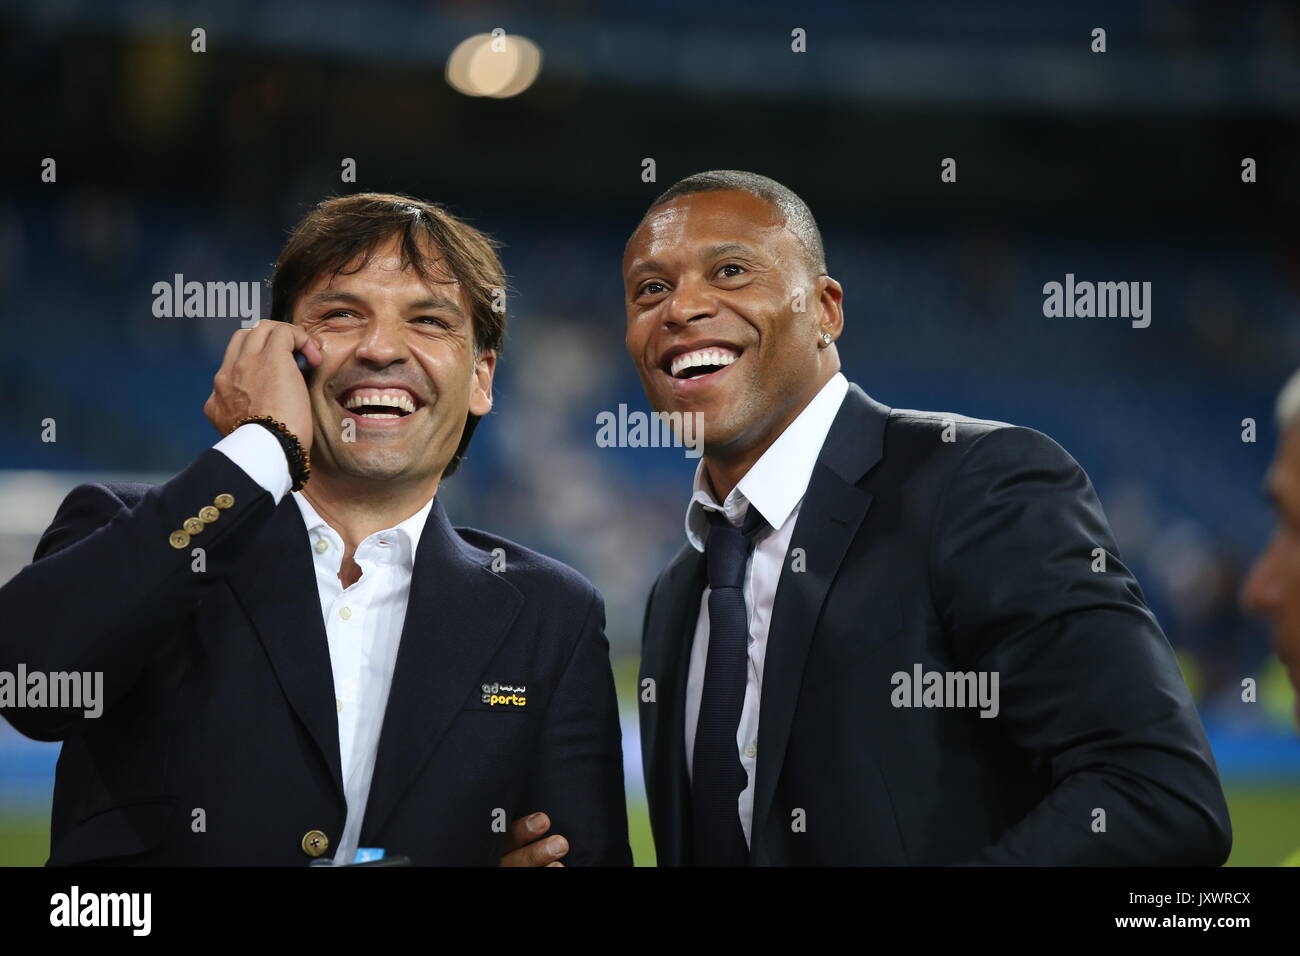 Former Real Madrid players Fernando Morientes and Julio Baptista. Real Madrid defeated Barcelona 2-0 in the second leg of the Spanish Supercup footbal Stock Photo